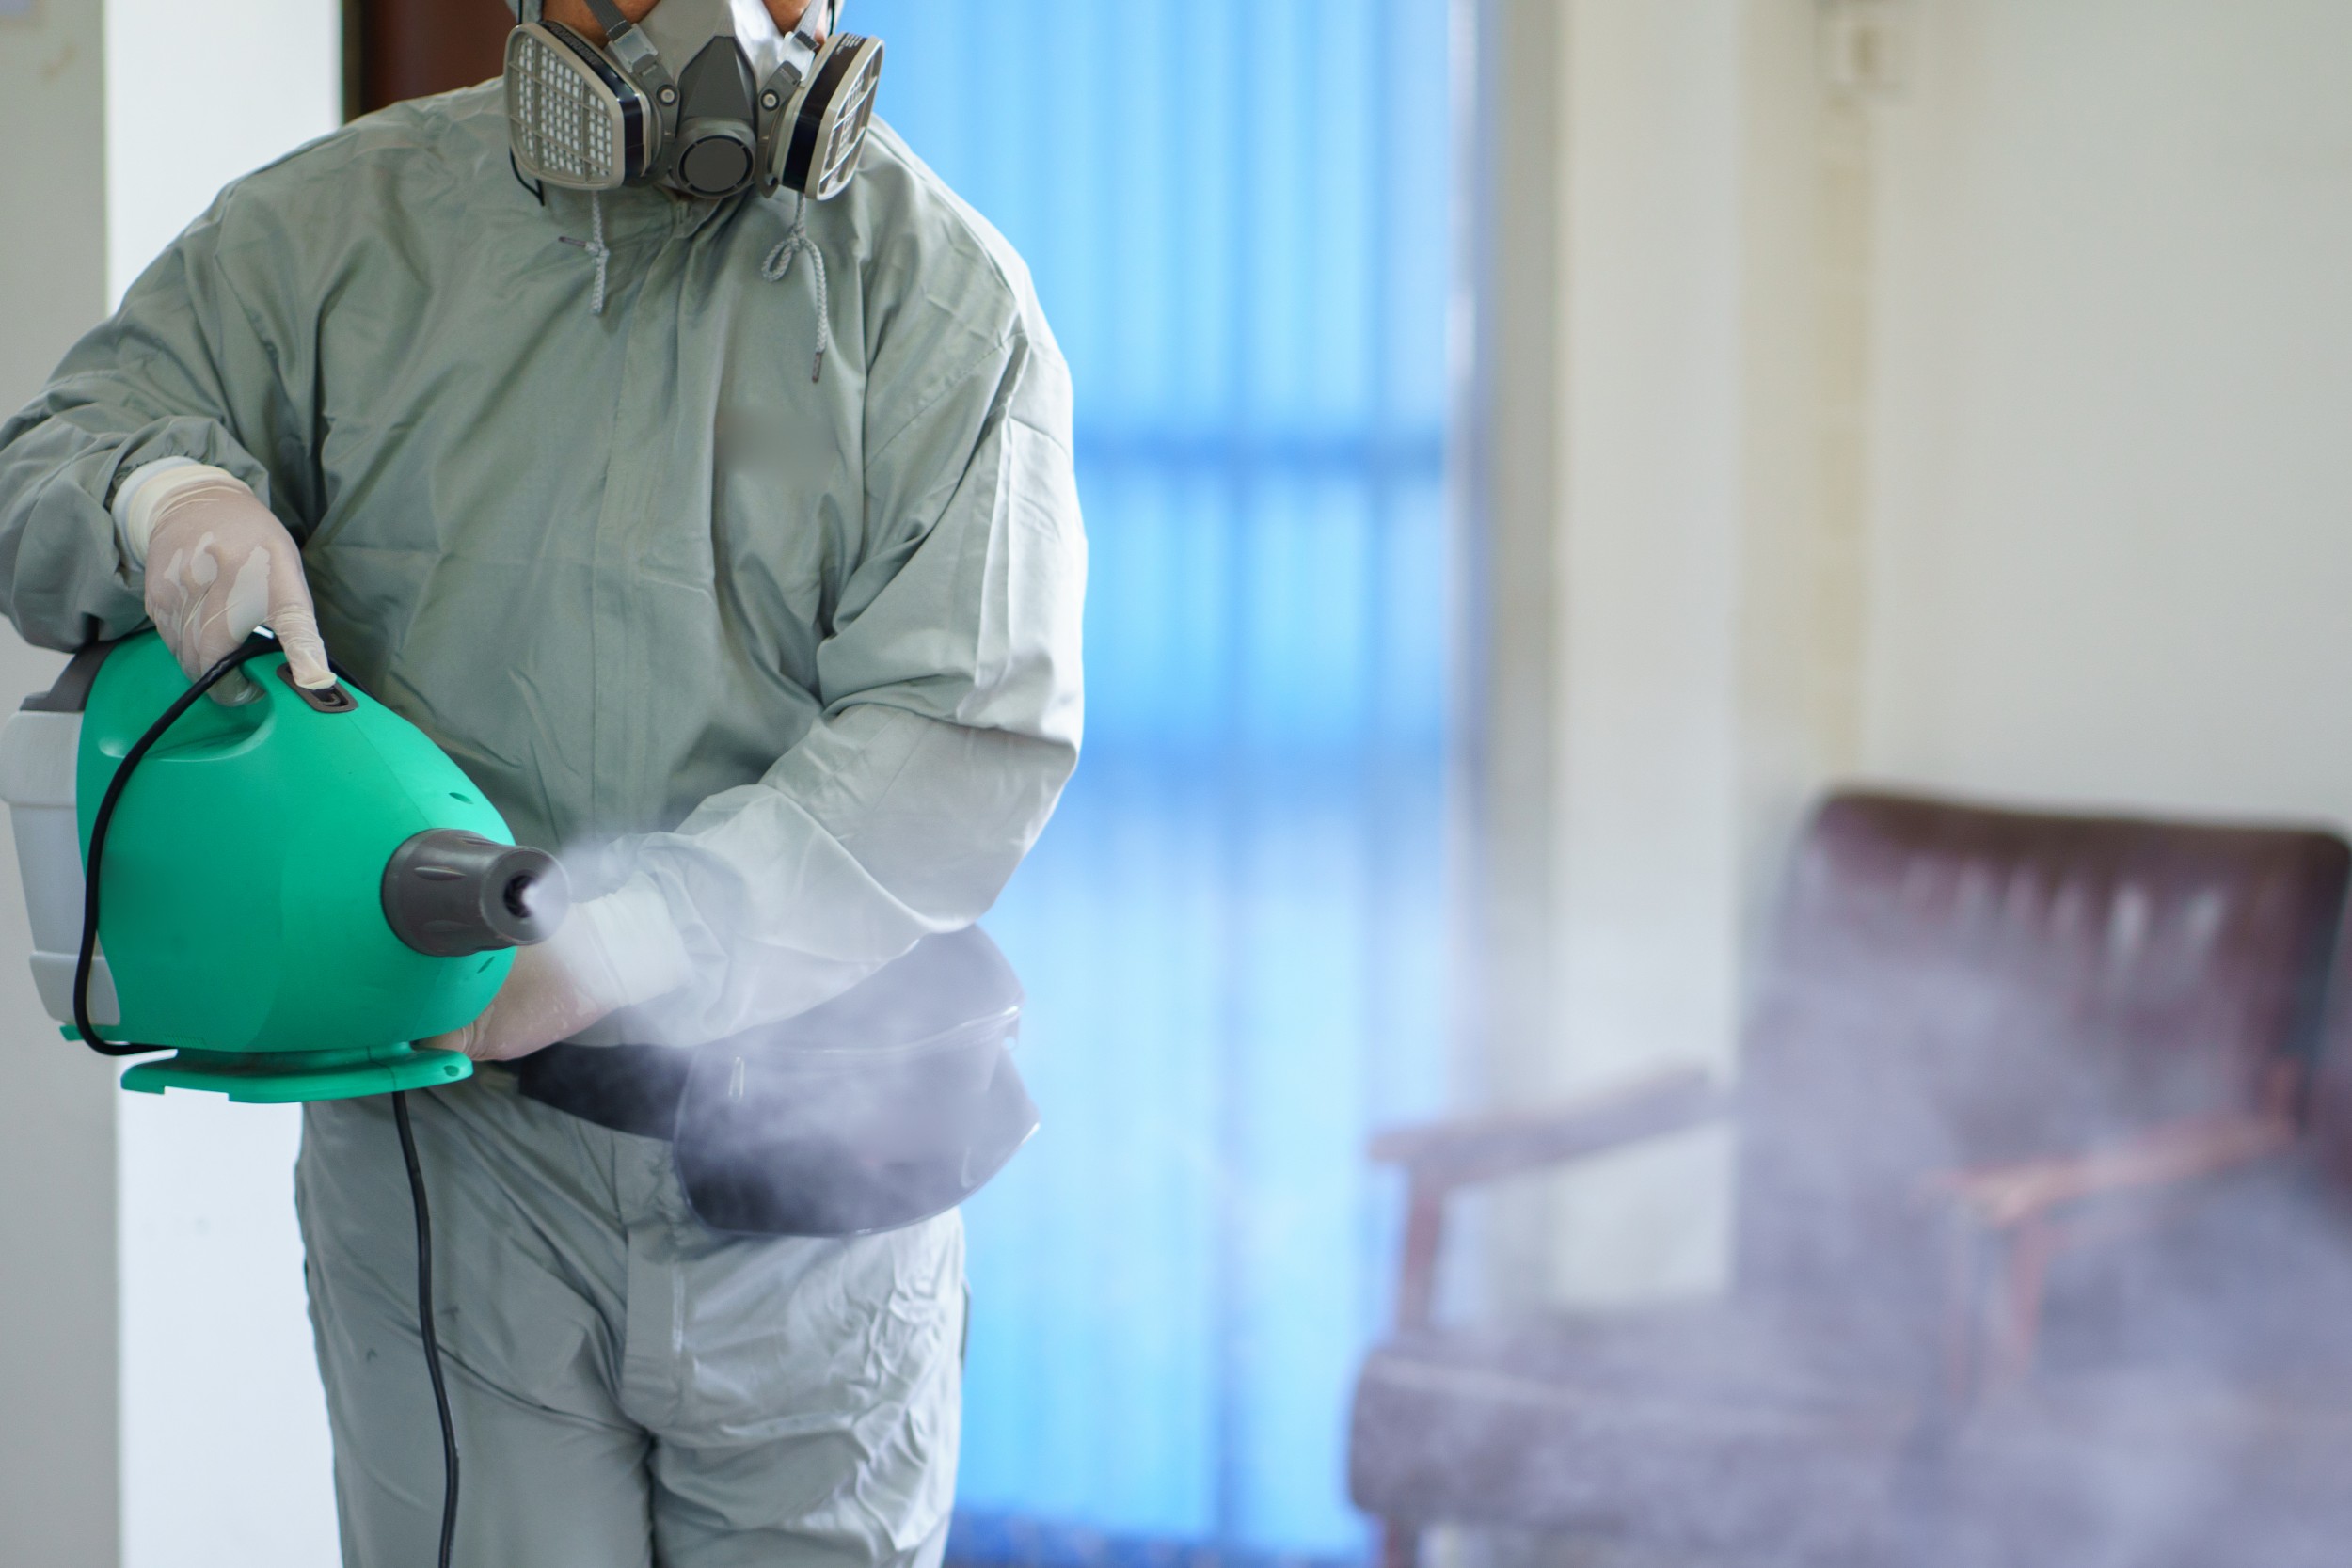 The new role of cleaning during a pandemic